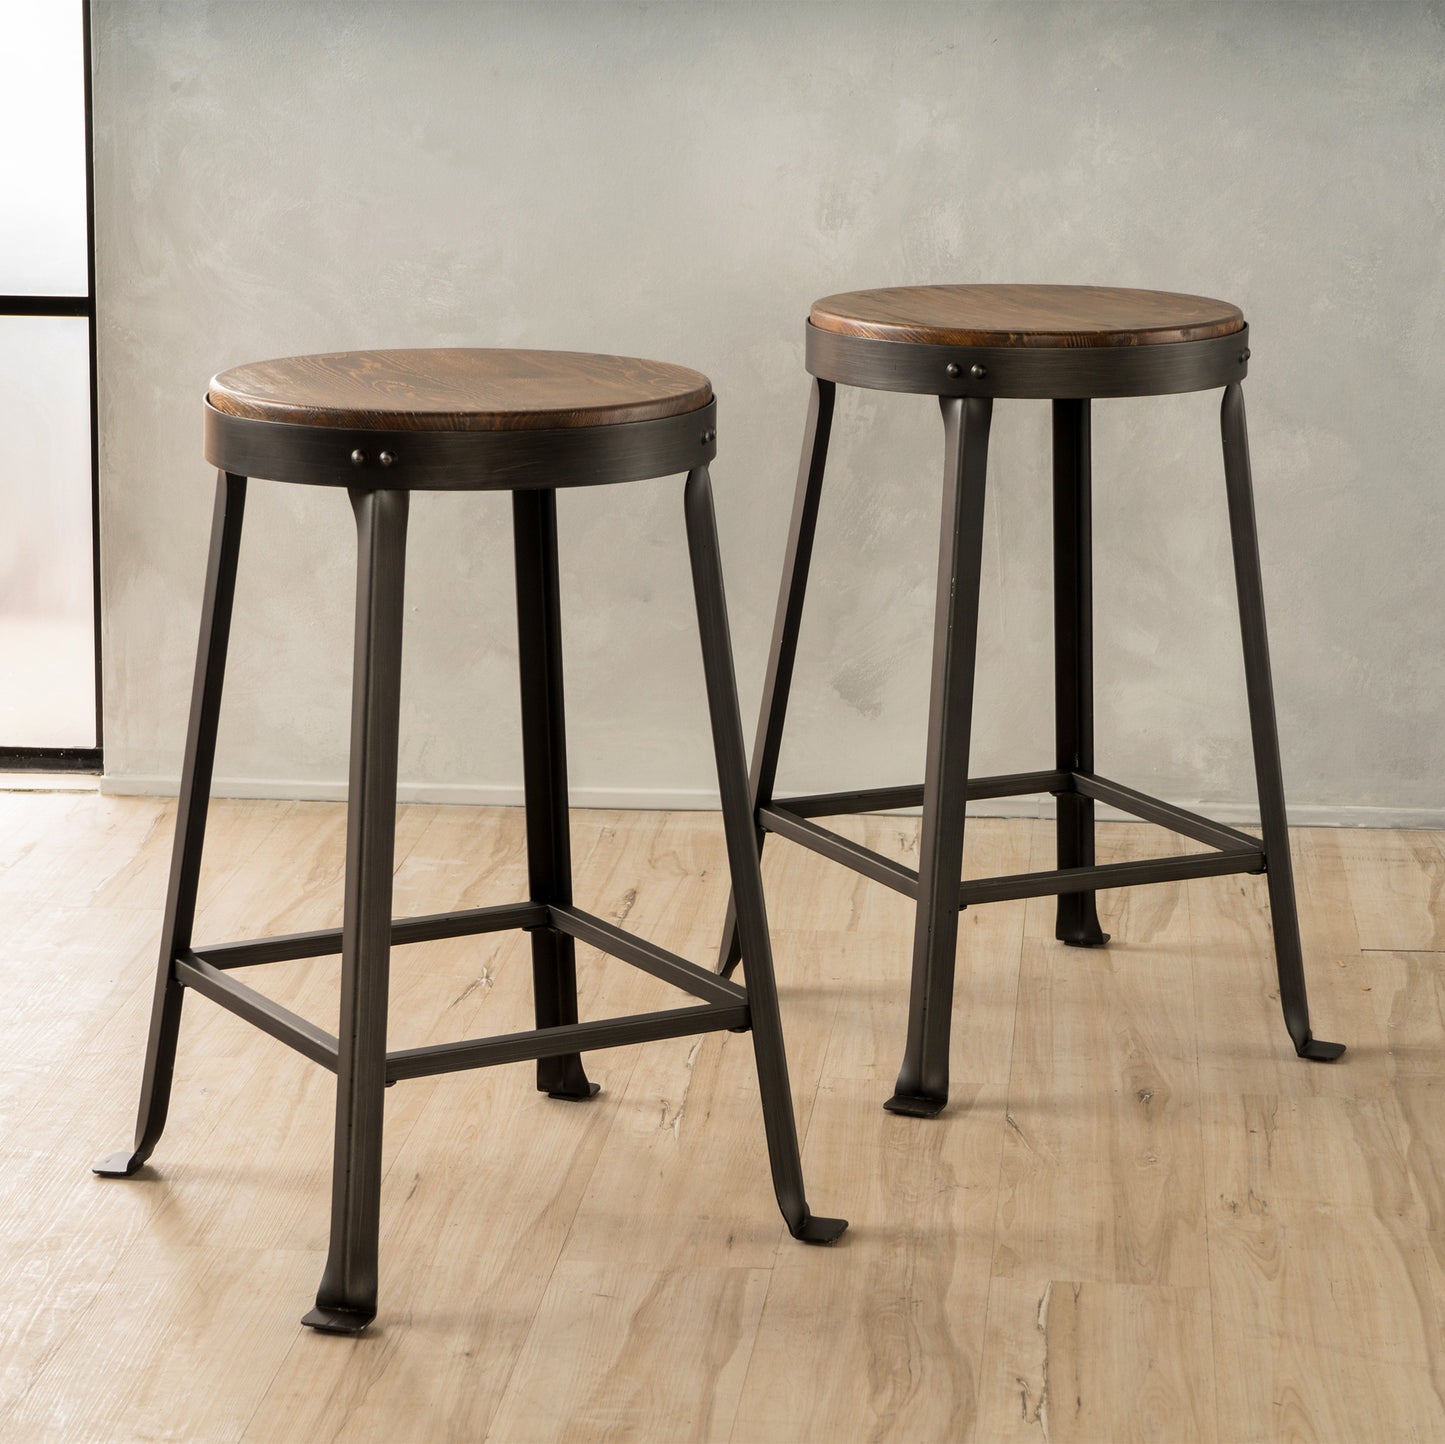 Garel 24-Inch Brown Weathered Wood Counter Stool (Set of 2)